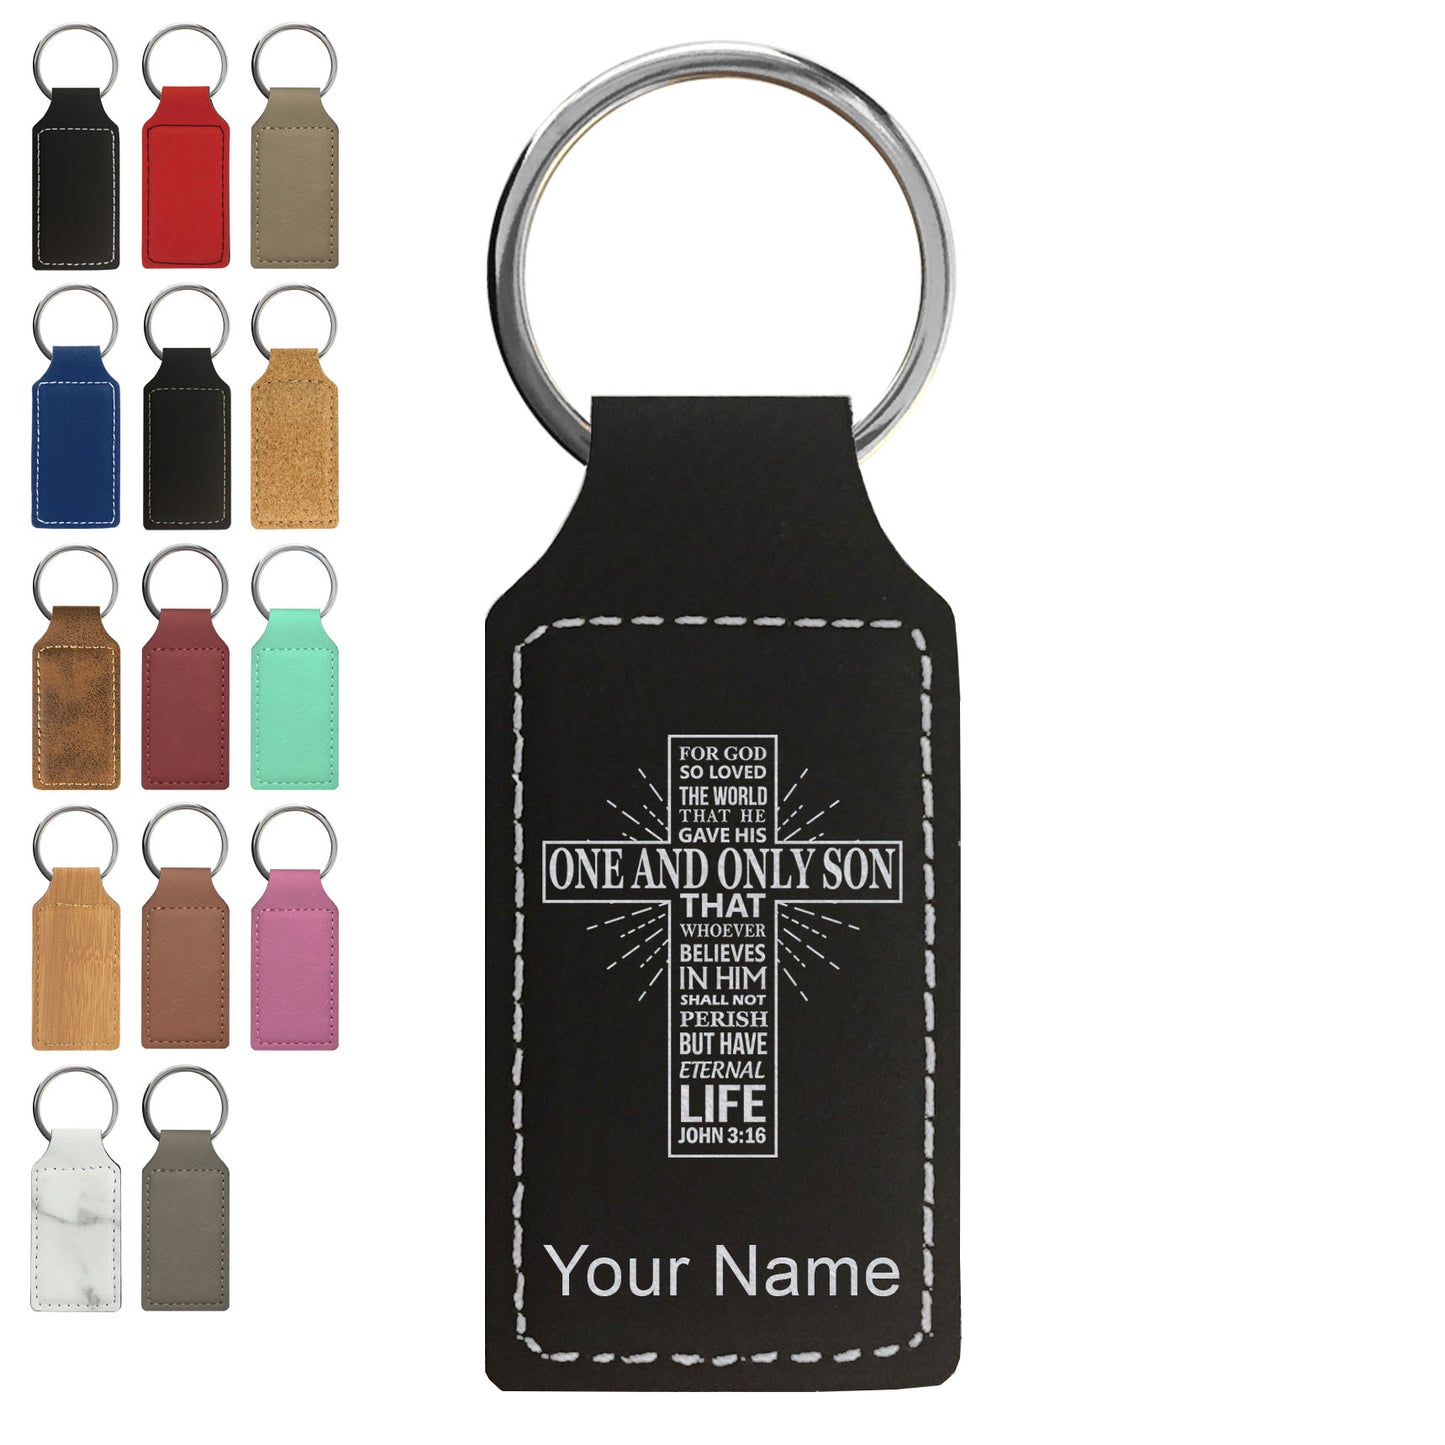 Faux Leather Rectangle Keychain, Bible Verse John 3-16, Personalized Engraving Included